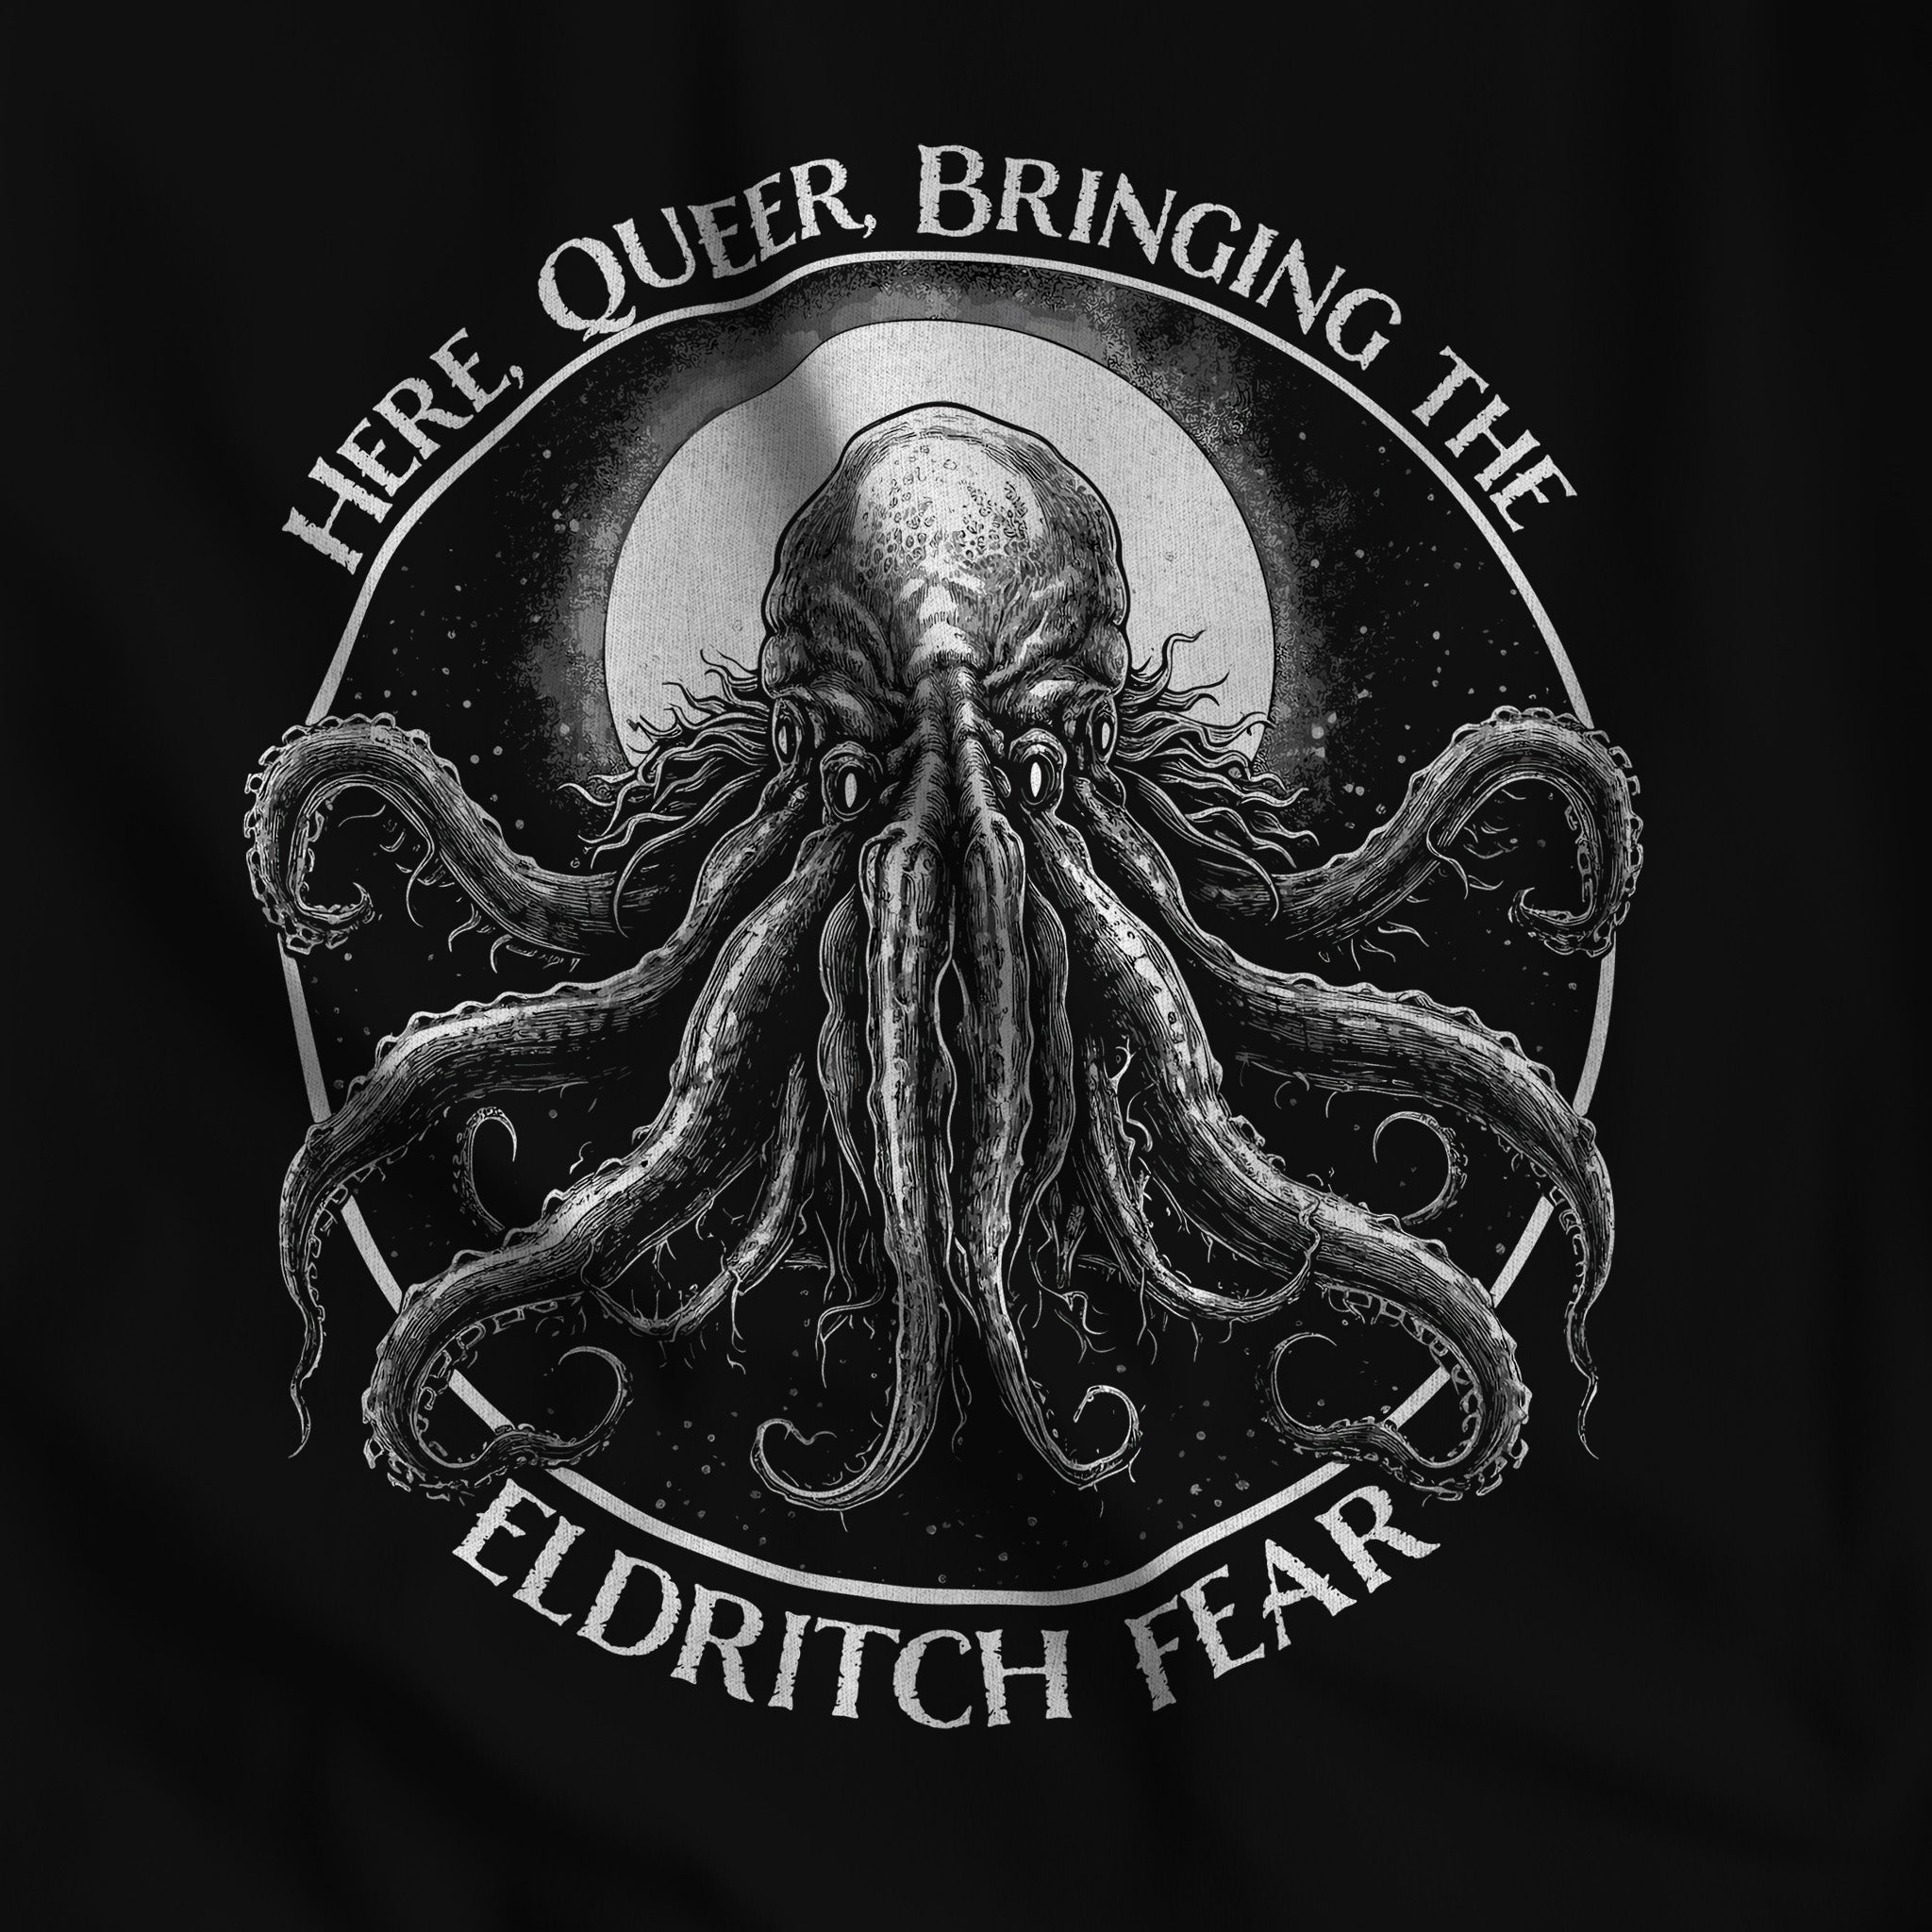 Queer Eldritch Fear T-Shirt - Lovecraftian LGBTQ+ Pride Statement - Hunky Tops#color_black